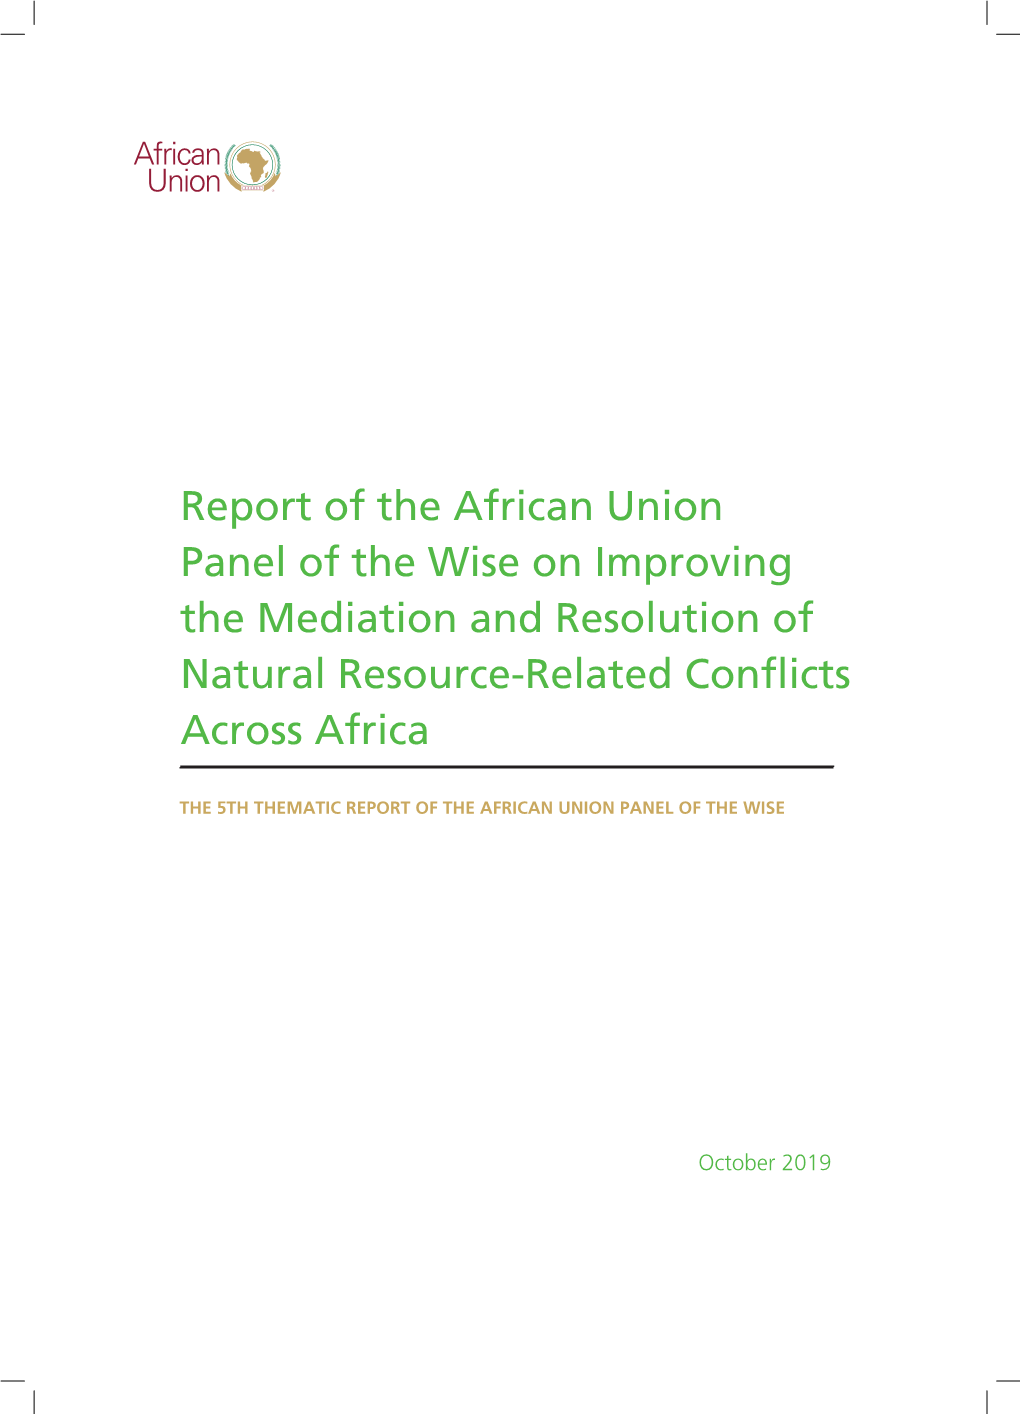 Report of the African Union Panel of the Wise on Improving the Mediation and Resolution of Natural Resource-Related Conflicts Across Africa